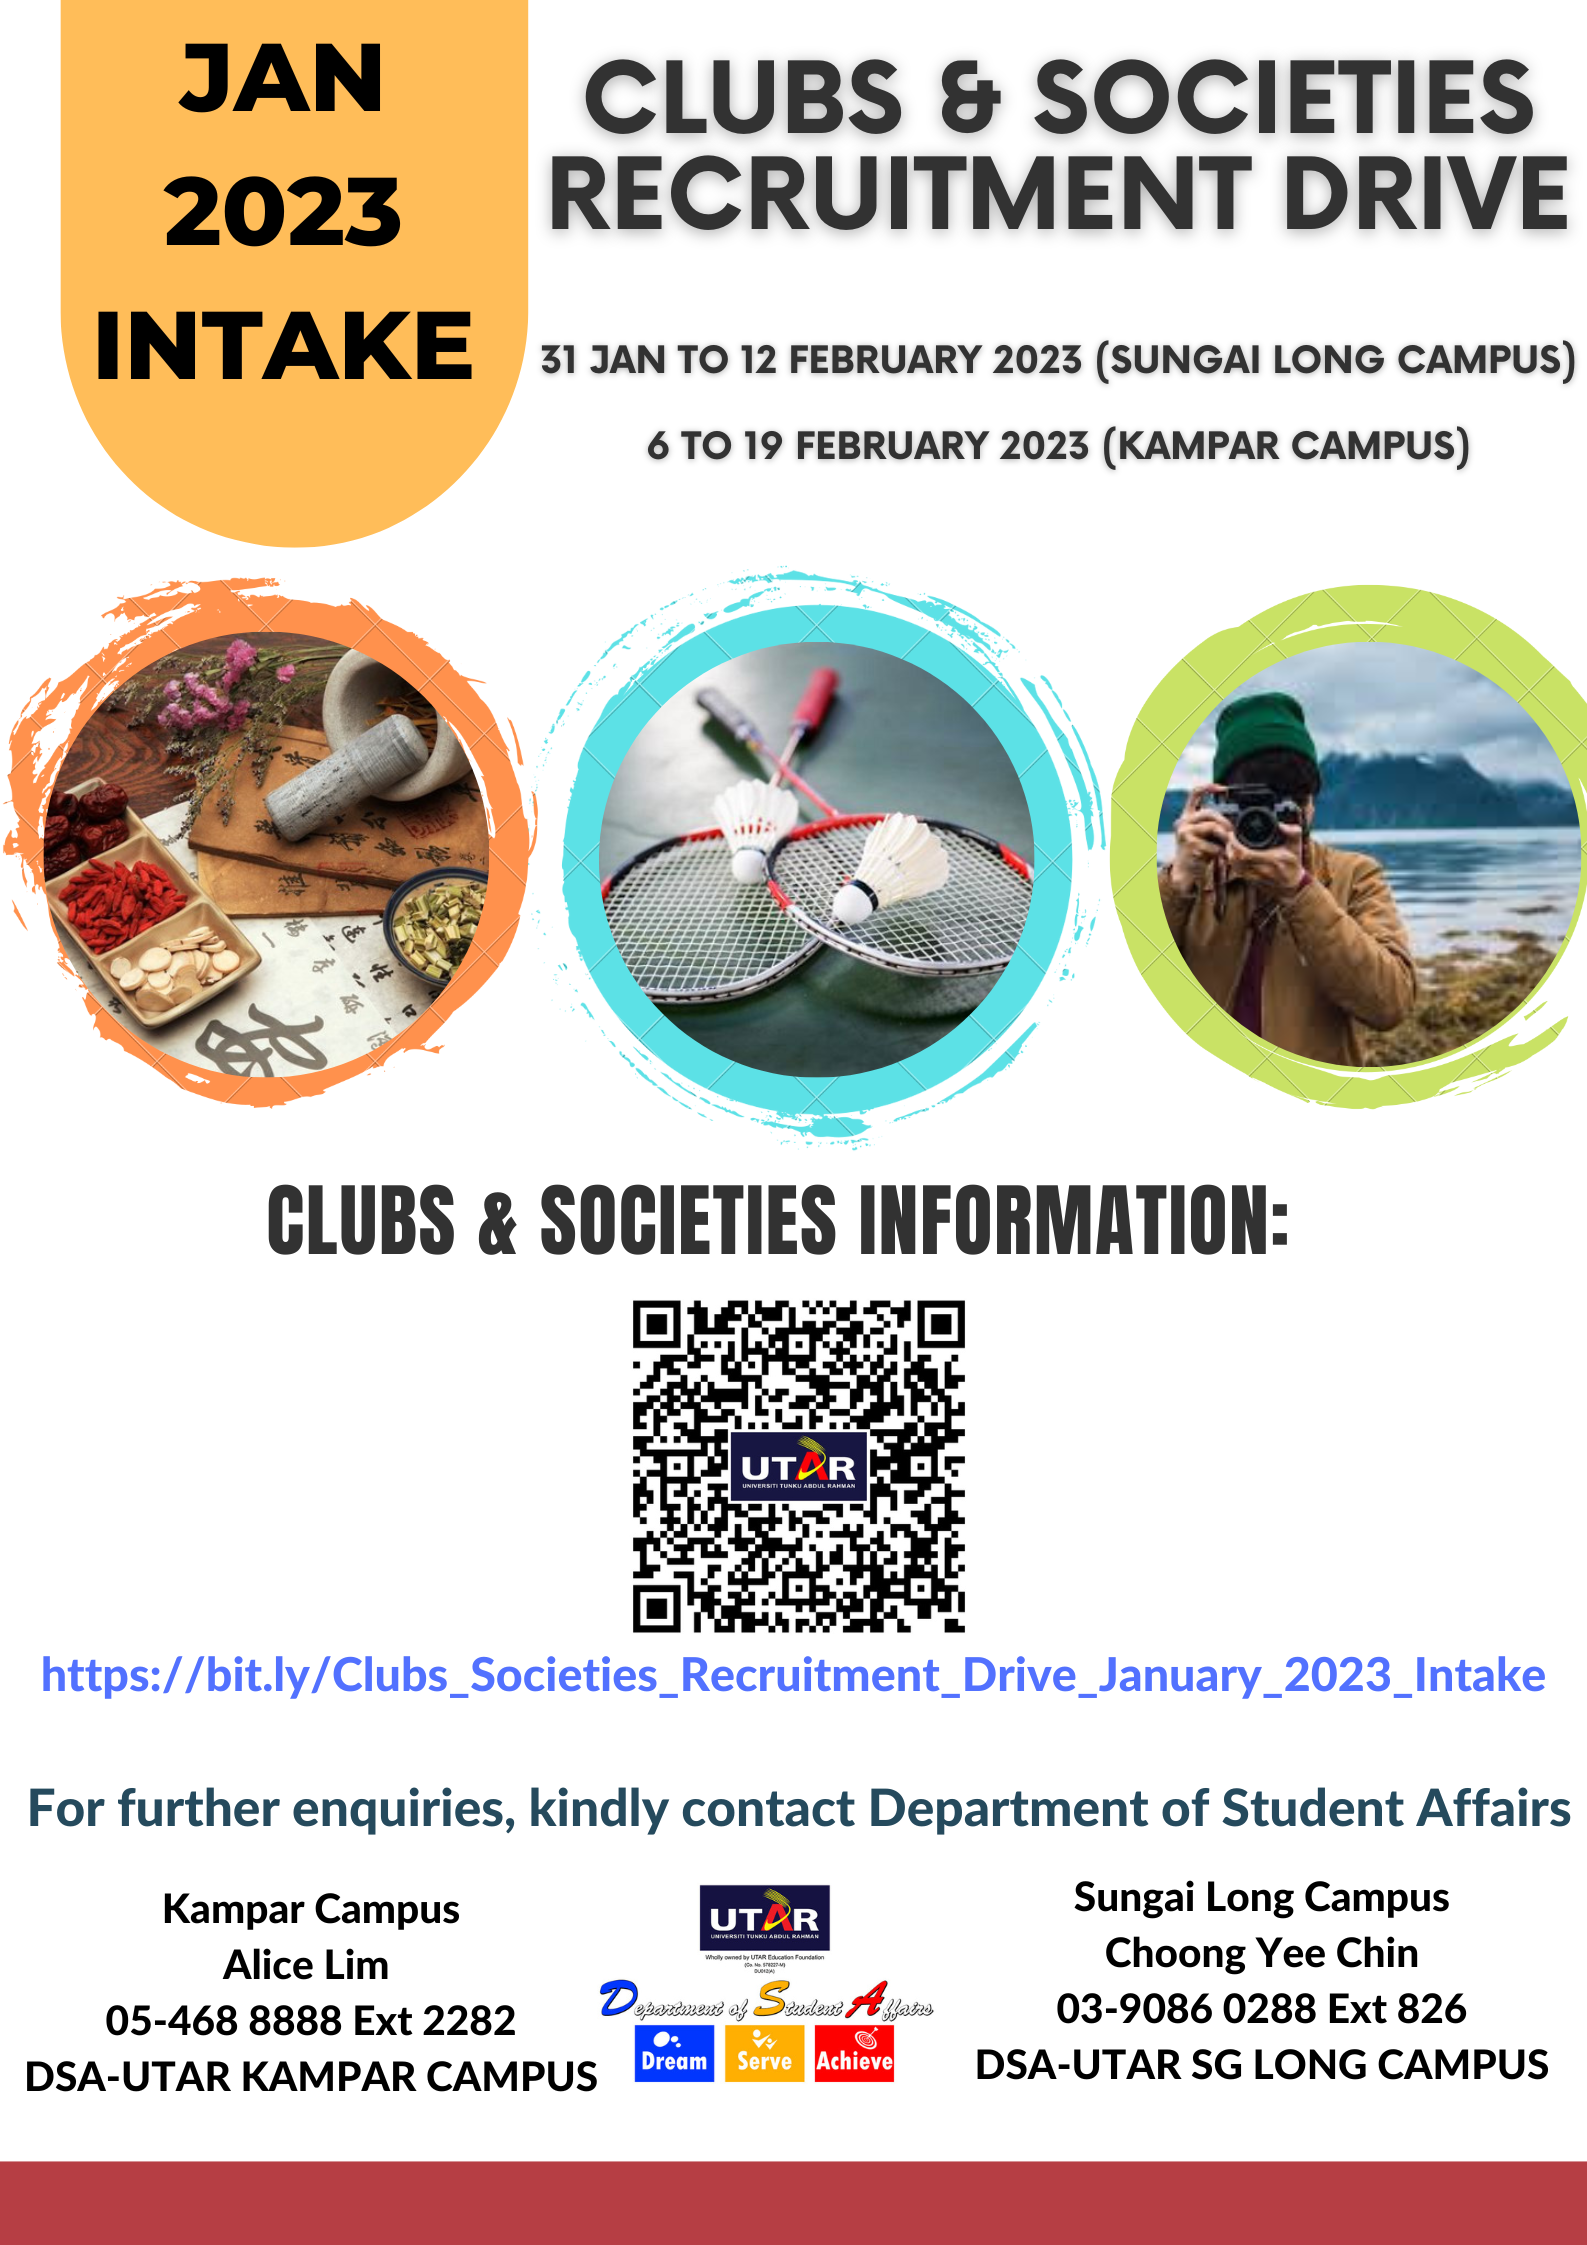 SRC UTAR Kampar Campus - Hello students! It has finally come to the  presentation week when most of y'all will be presenting for your respective  courses. Do you know a proper dress